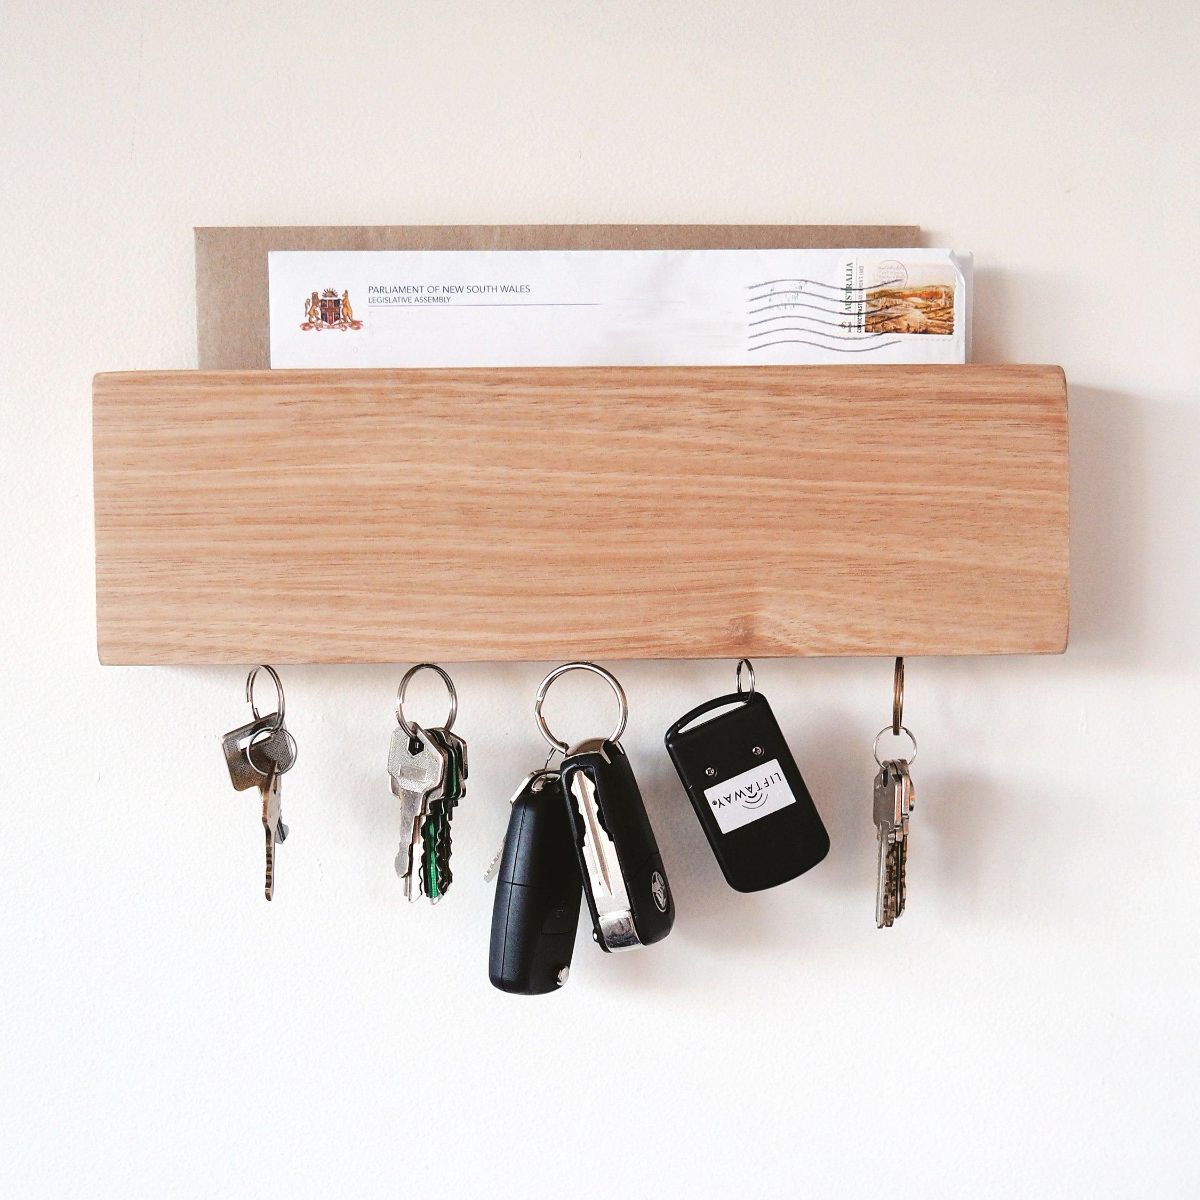 This is a wall-mounted mail and magnetic key holder for the entryway. Can be personalised for a great gift